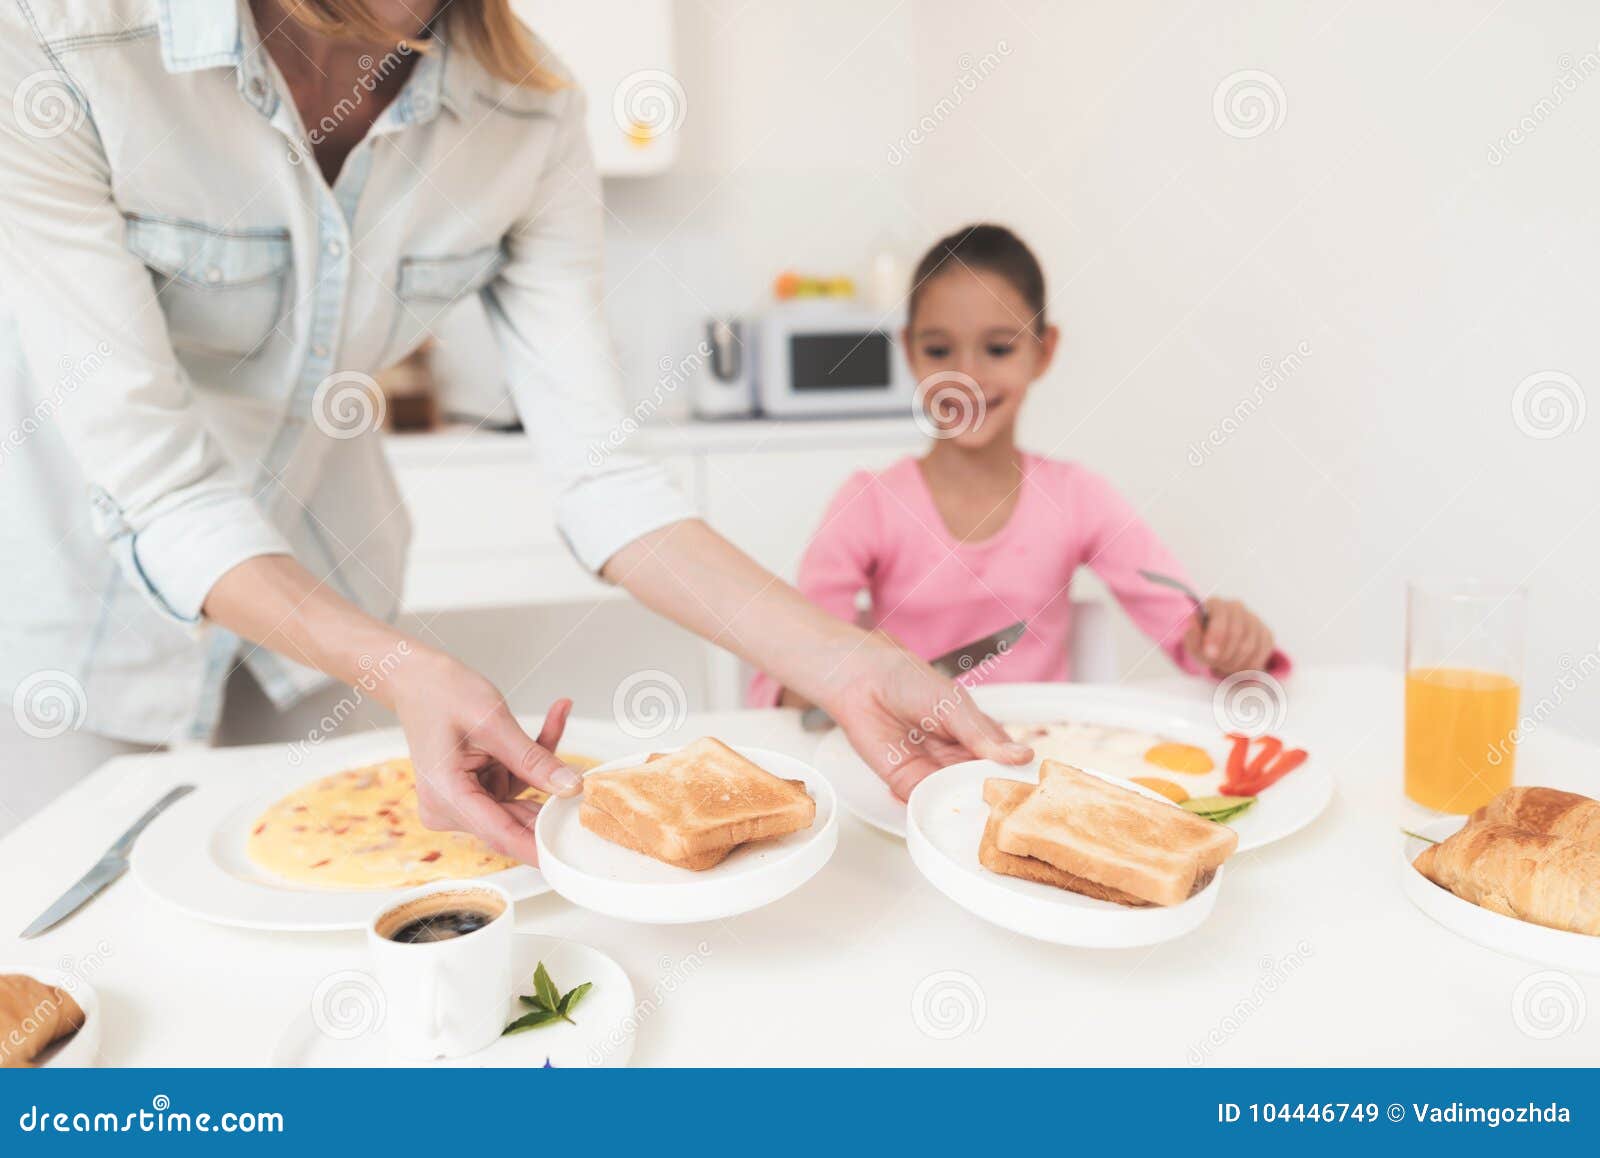 Mom Gives Her Daughter Breakfast They Are In The Bright Kitchen Stock Image Image Of Bright